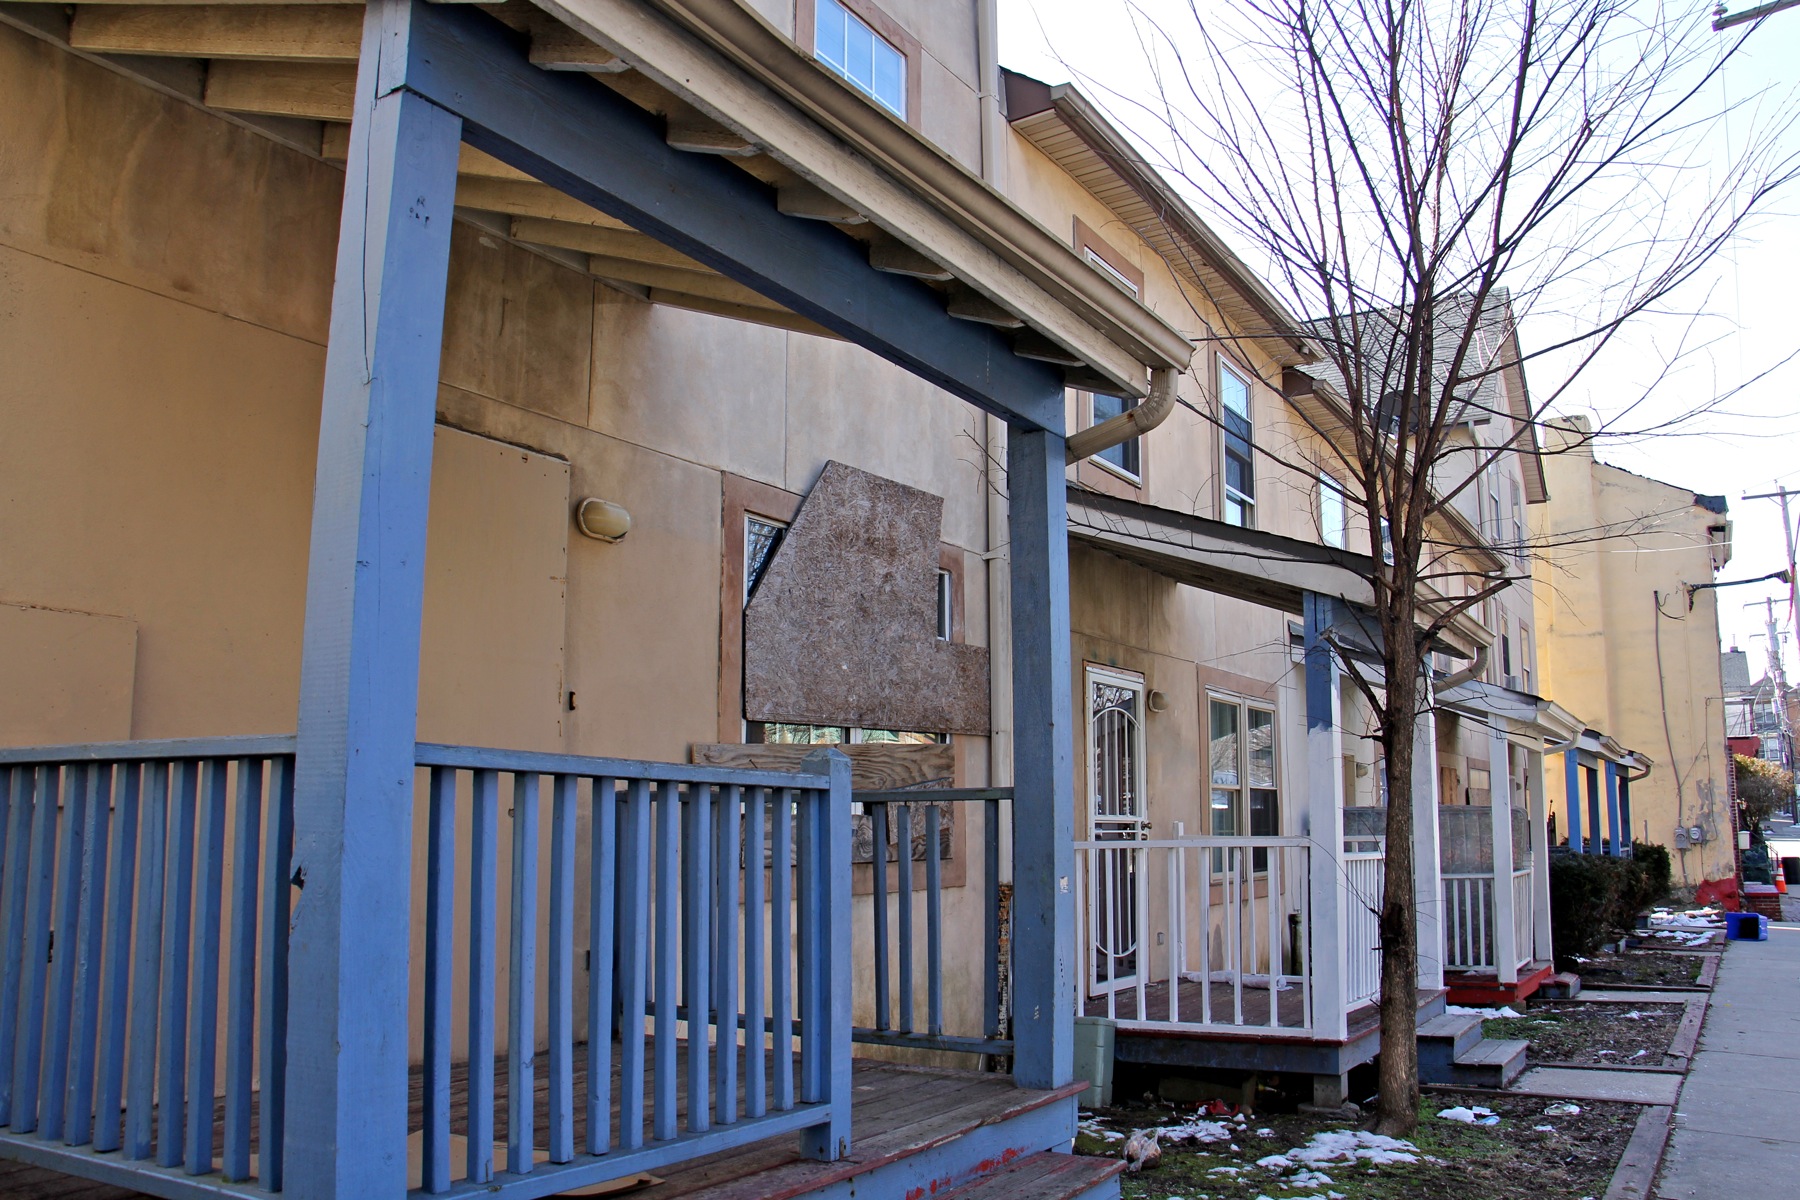 Homes in the unit block of Wister Street, some still occupied, show signs neglect. (Emma Lee/WHYY)